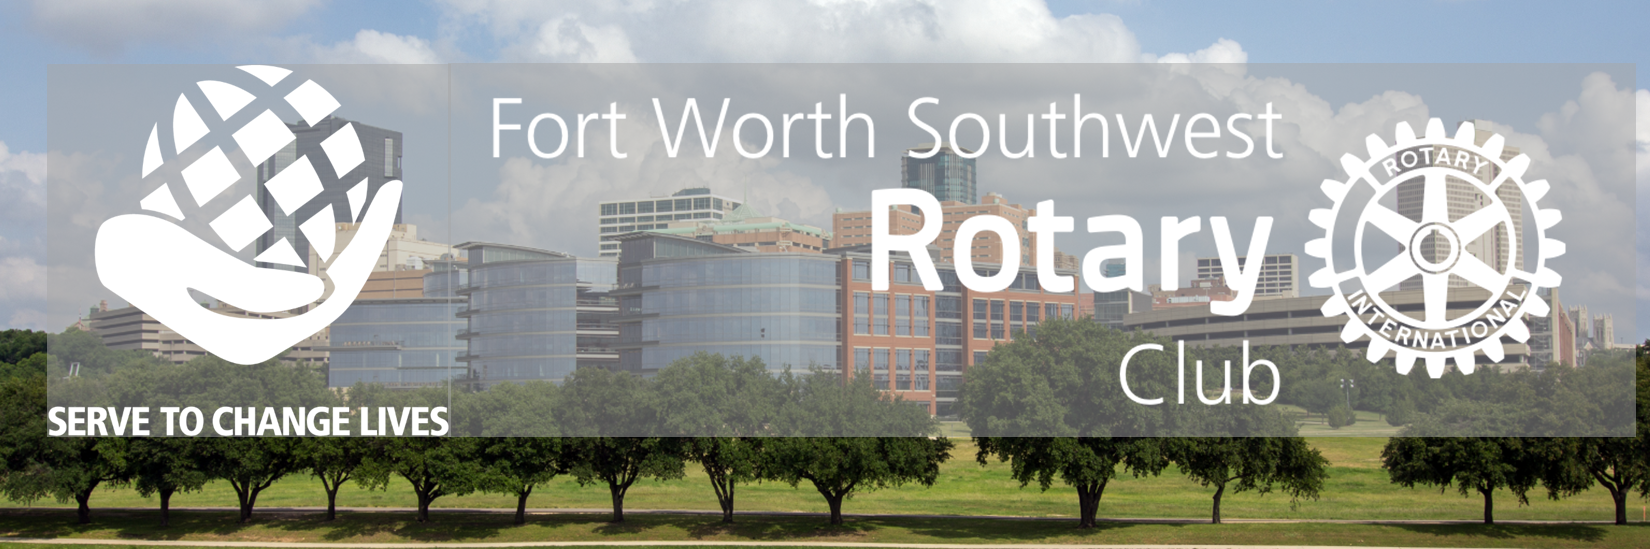 2021-homepage-Fort-Worth-Southwest-RC-Webpage-Banner.png